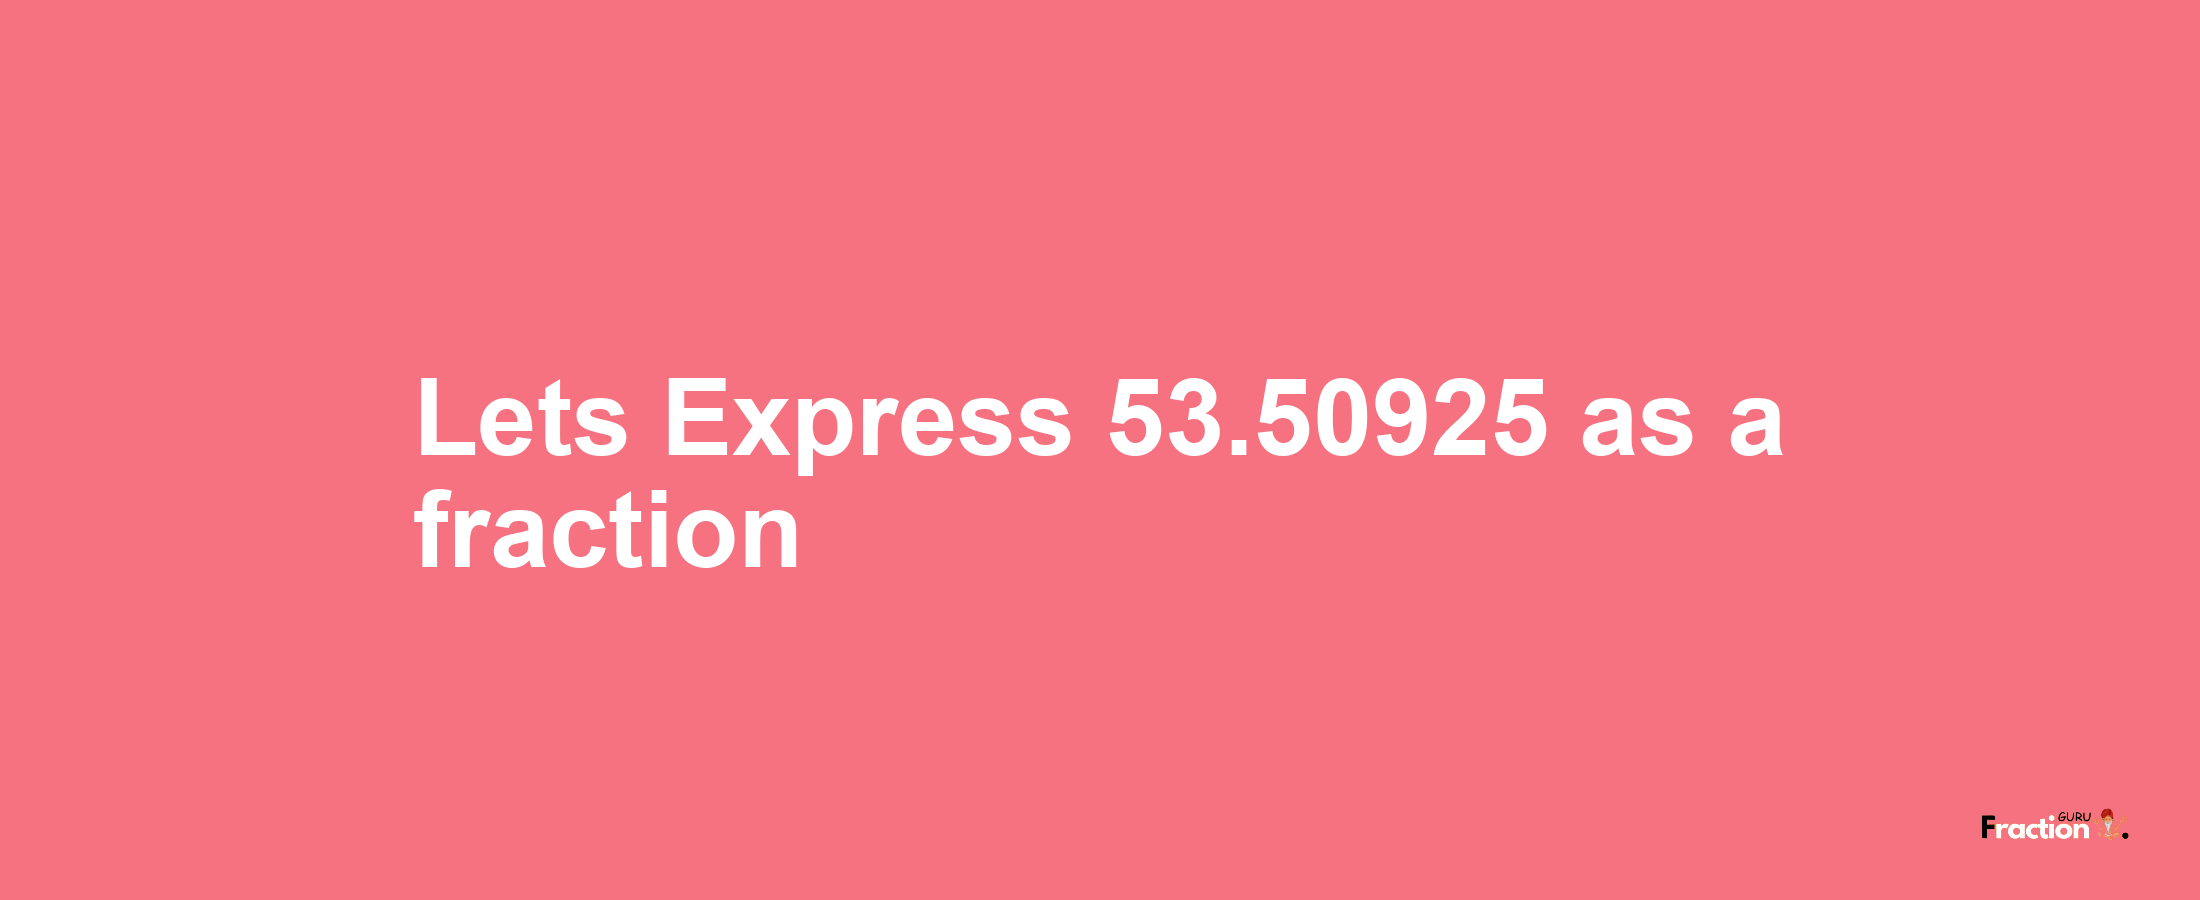 Lets Express 53.50925 as afraction